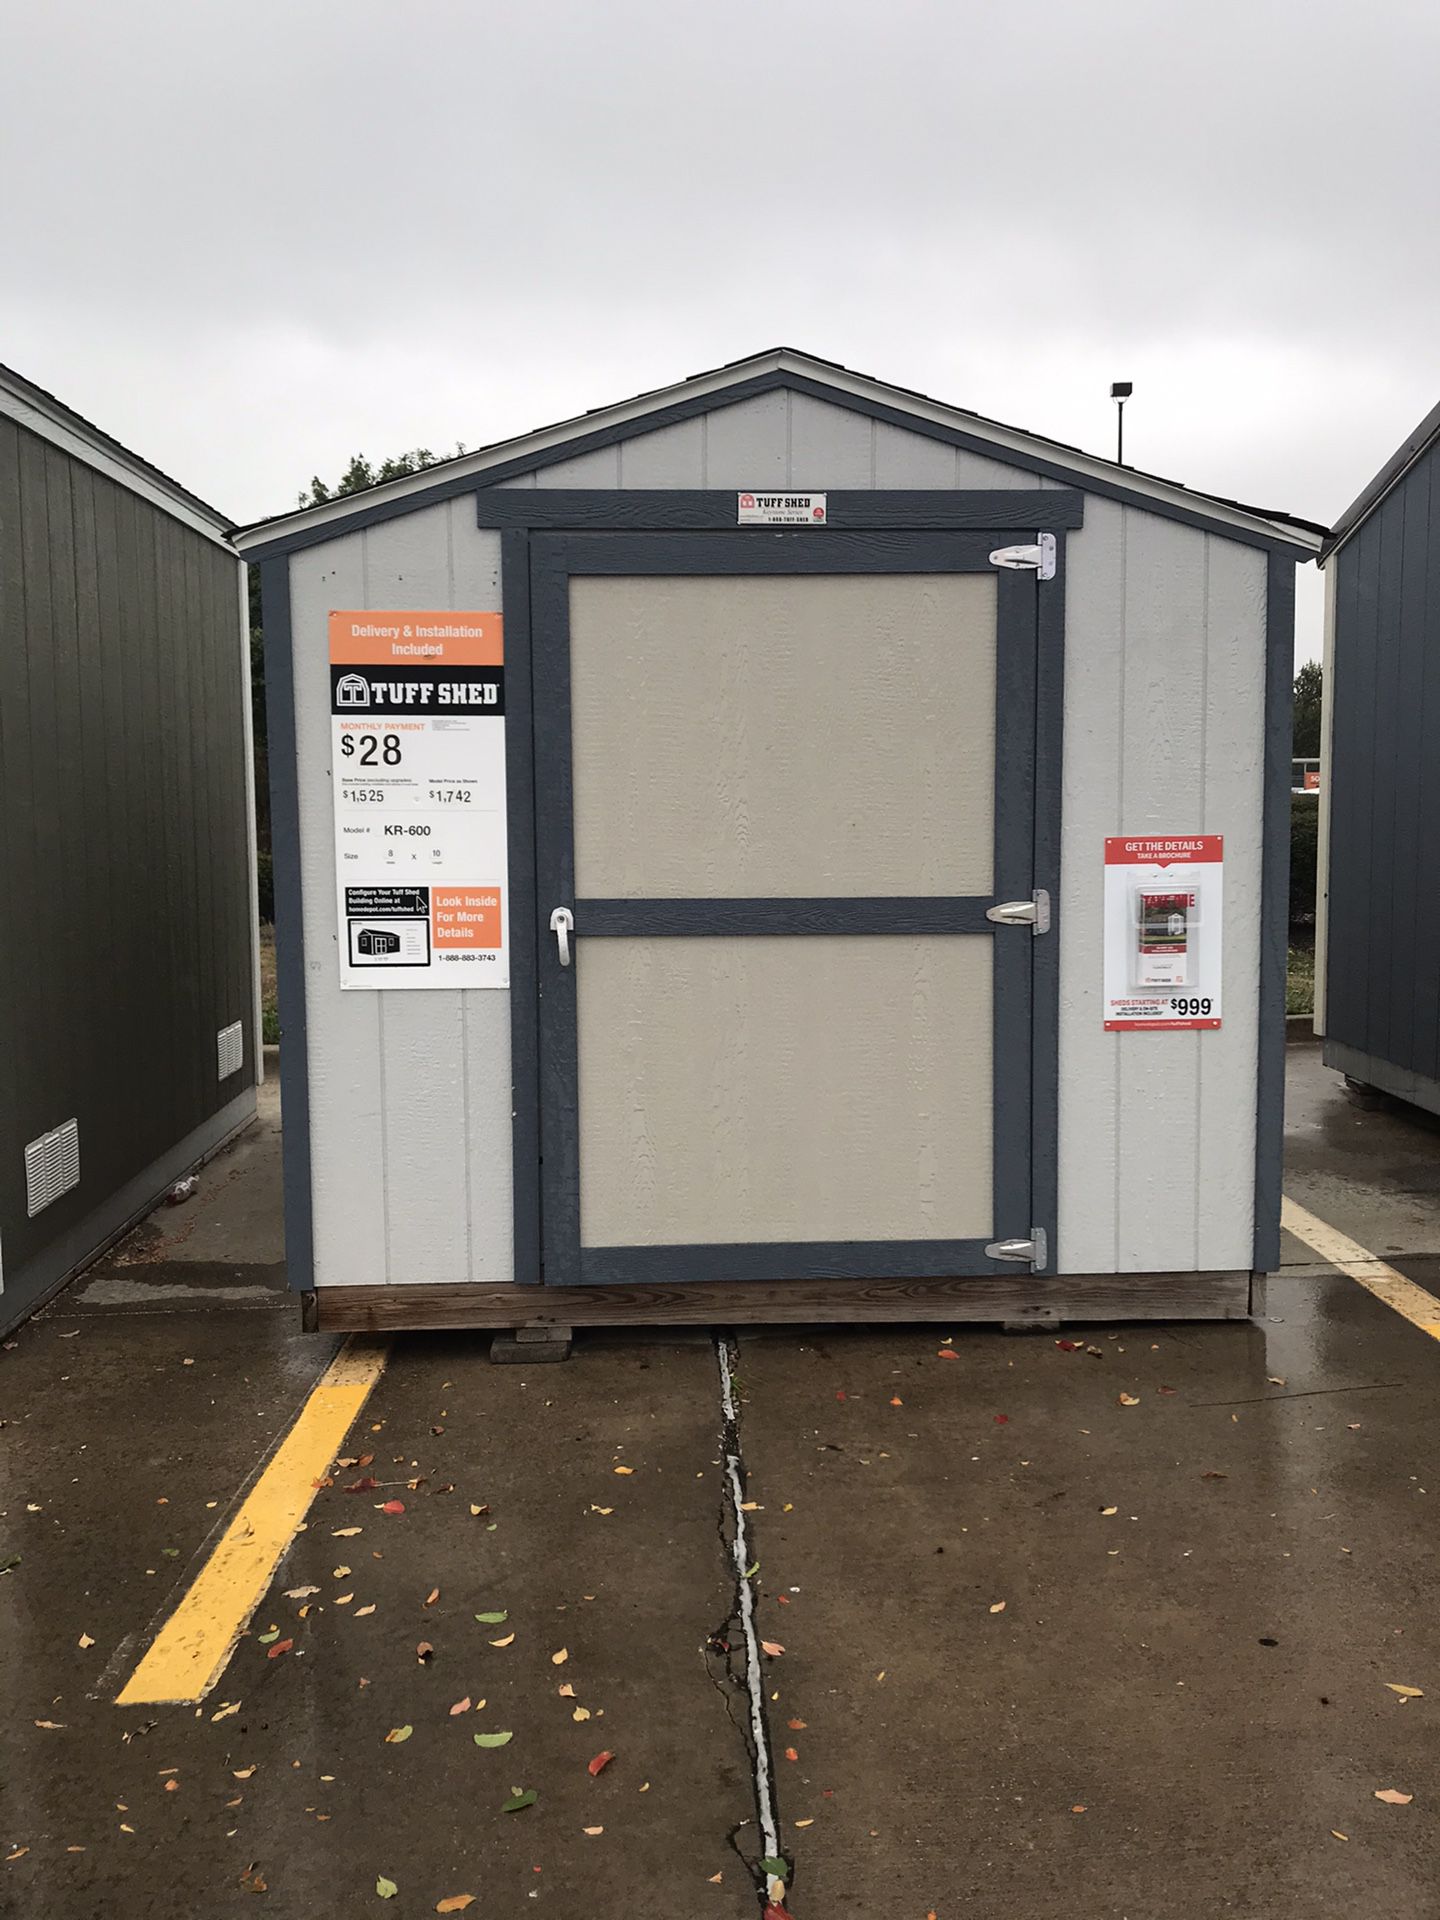 Tuff Shed 8x10 KR600 Display for SALE! Located at Skillman Home Depot.